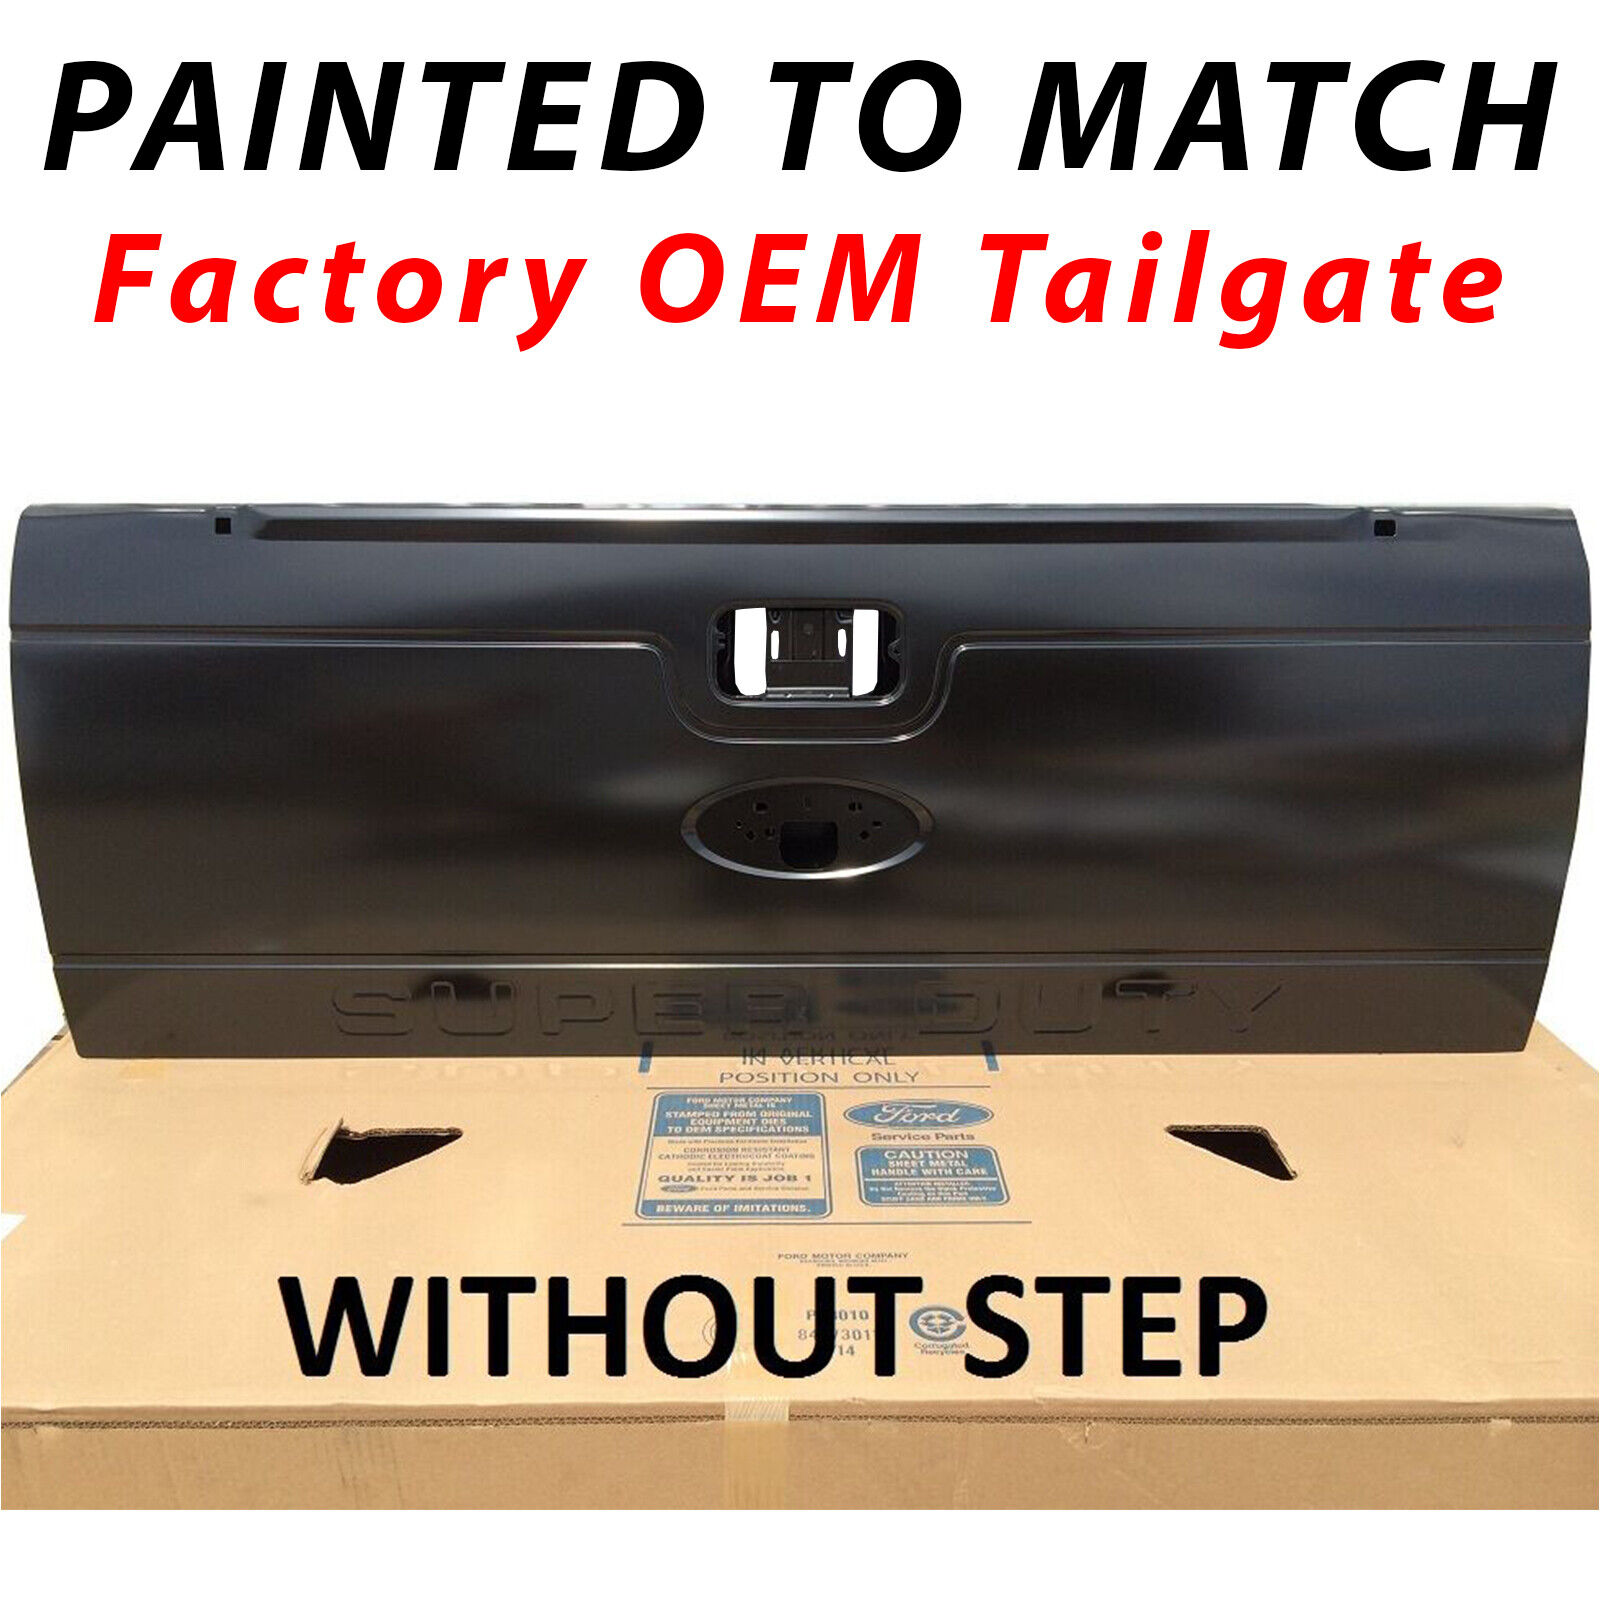 NEW Painted To Match Factory OEM TAILGATE for 08-16 Ford F250 F350 Super Duty